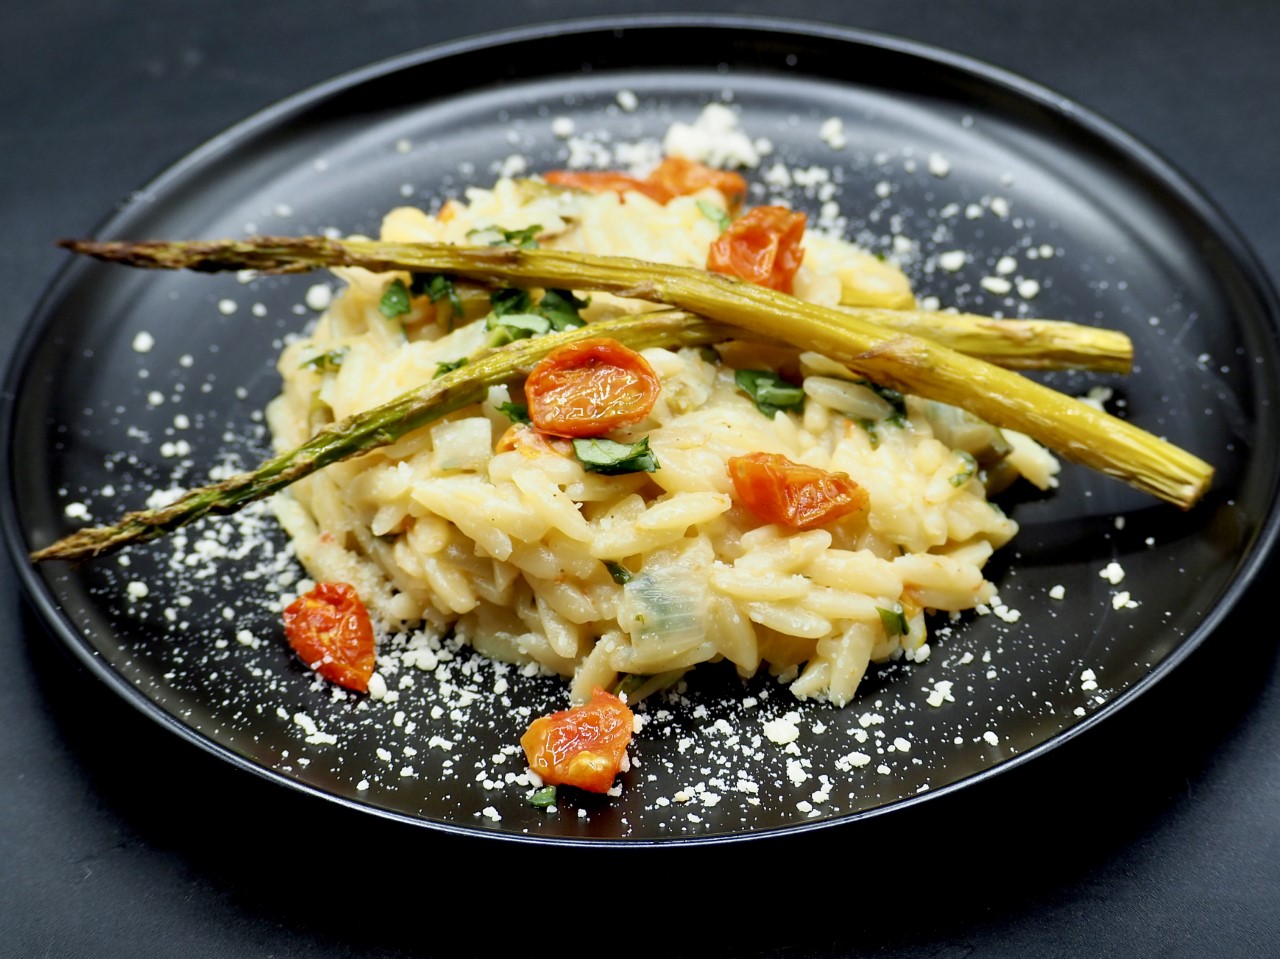 Stovetop Orzo Pasta with Roasted Green Asparagus and Cherry Tomatoes